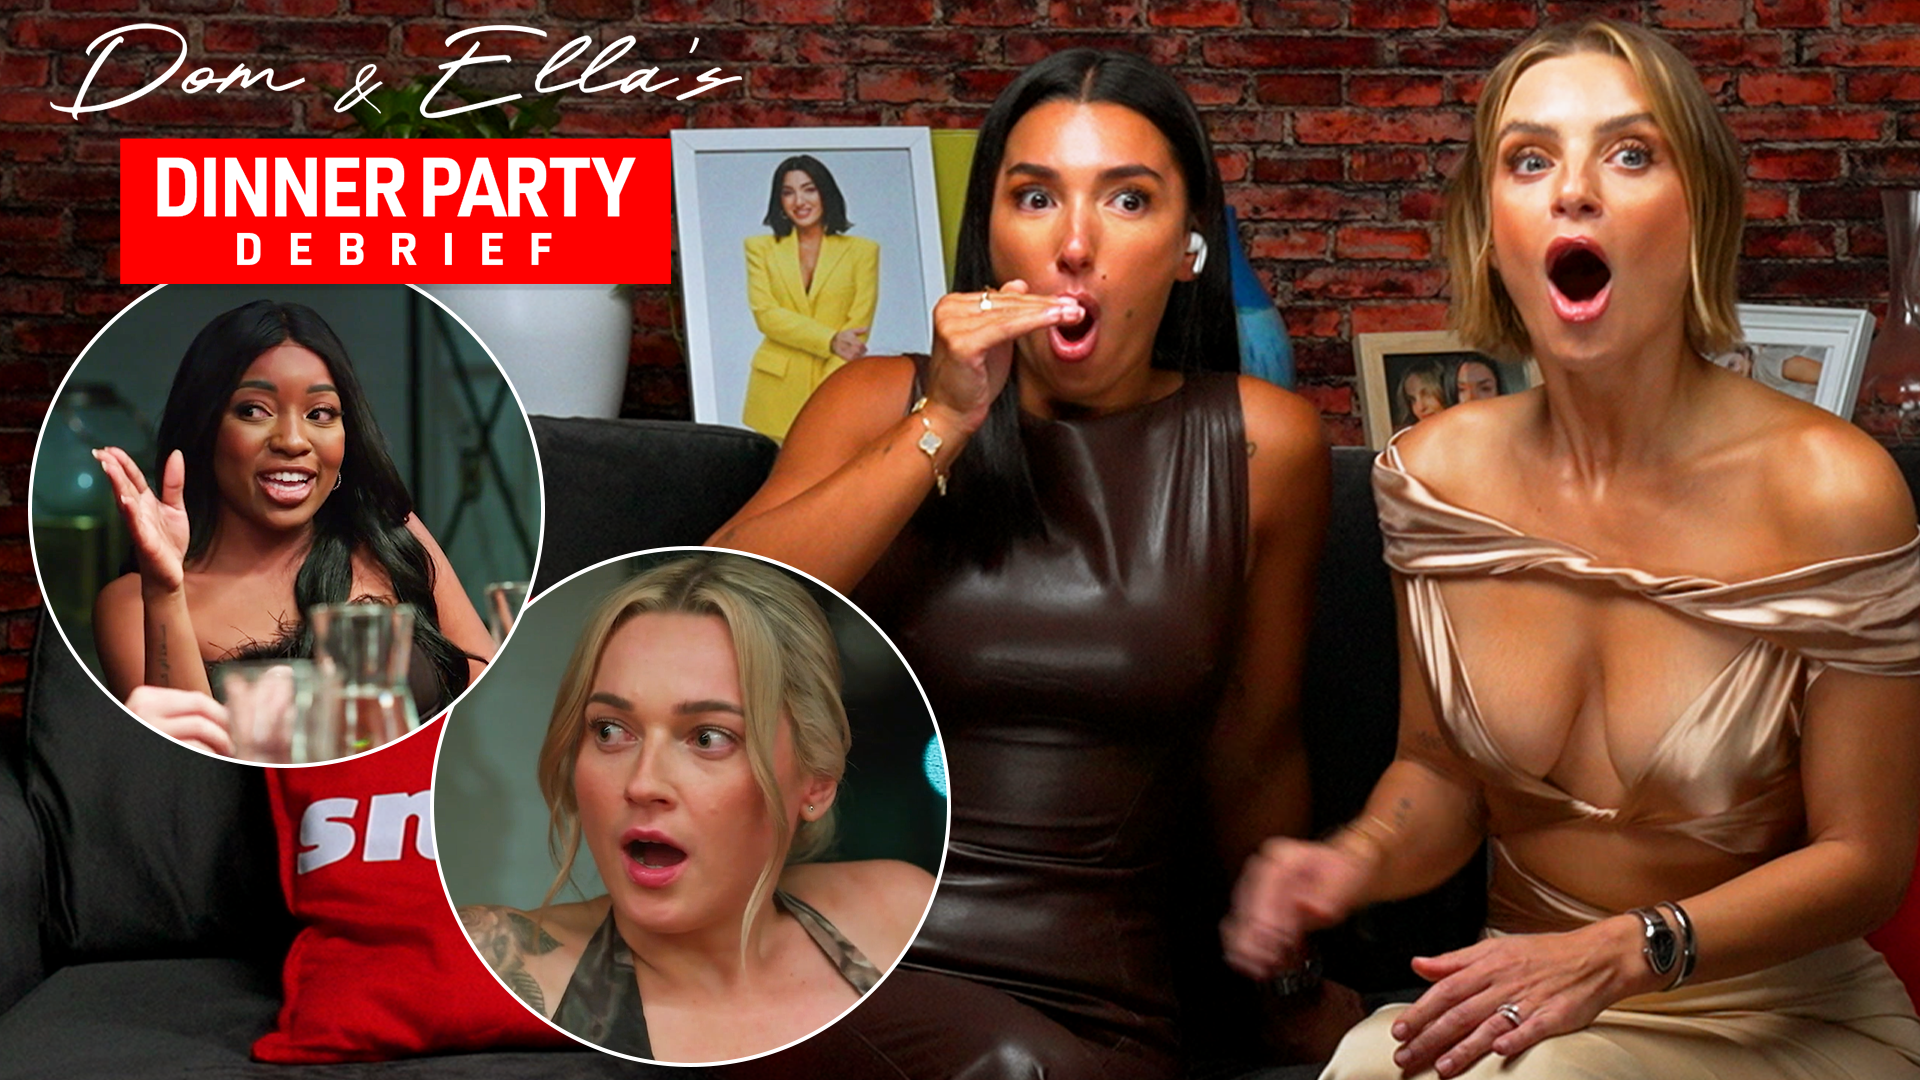 Dinner Party Debrief Episode 4: Dom and Ella horrified by one bride's 'superiority complex'